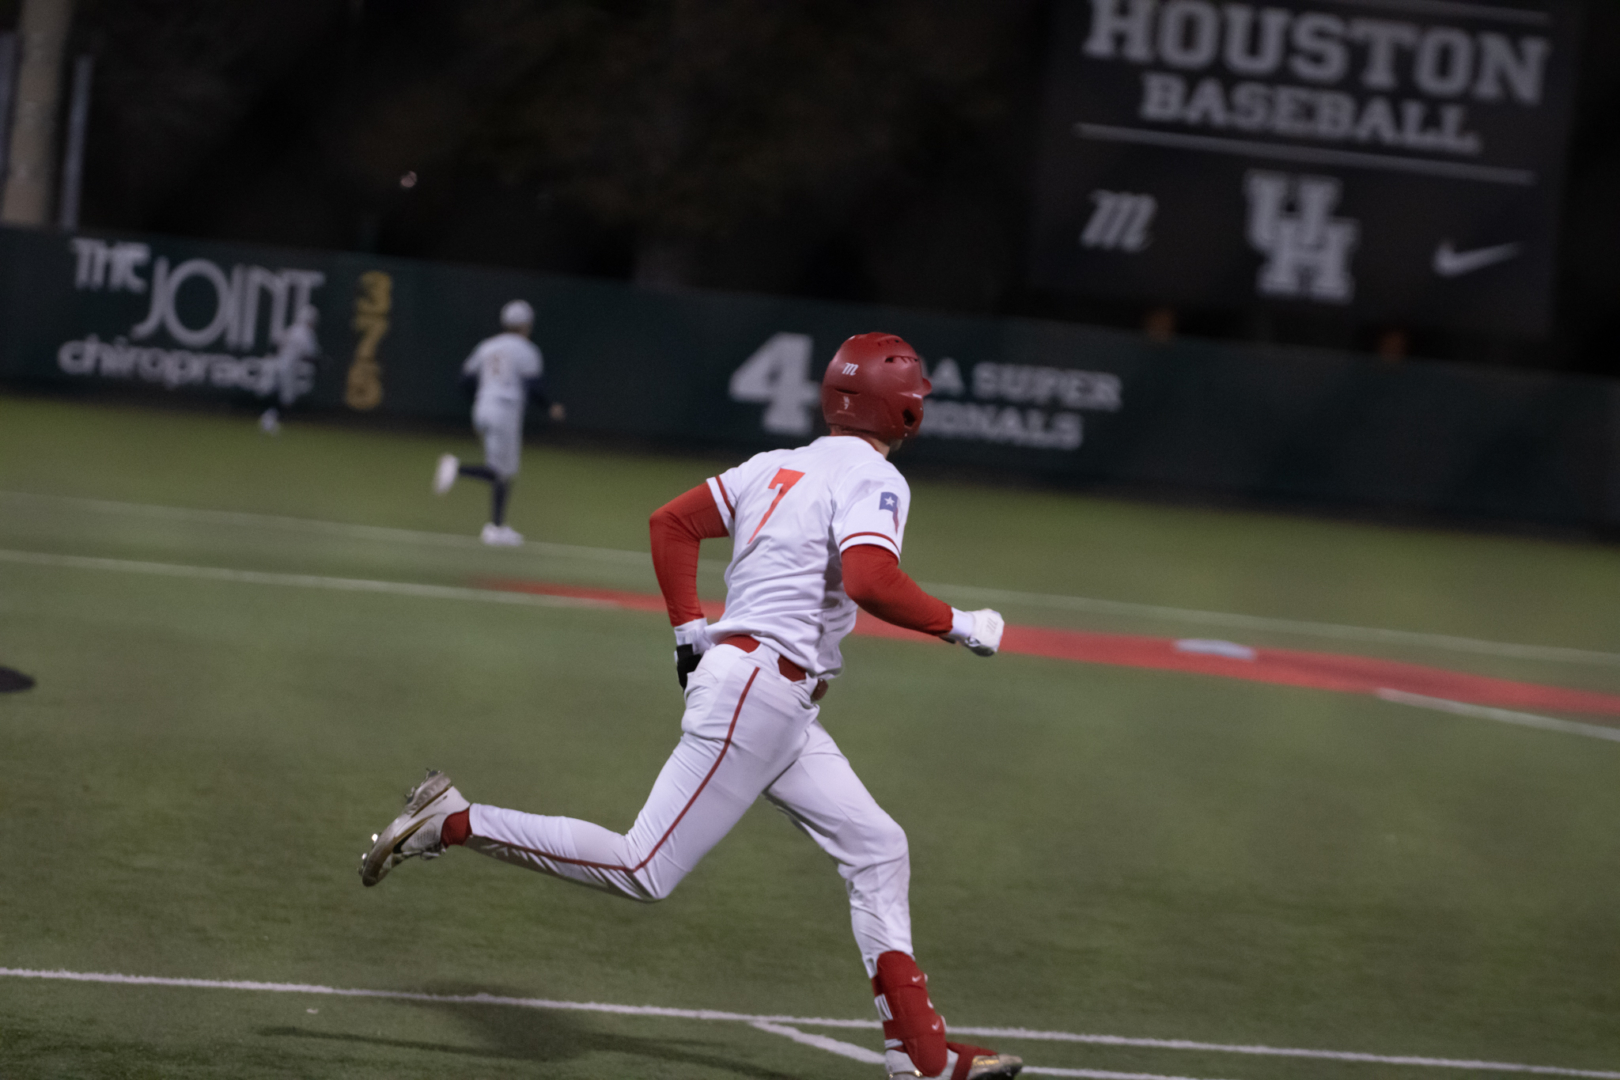 UH baseball lost two of three at UTRGV over the seeking, falling to 4-7 on the season. | Raphael Fernandez/The Cougar